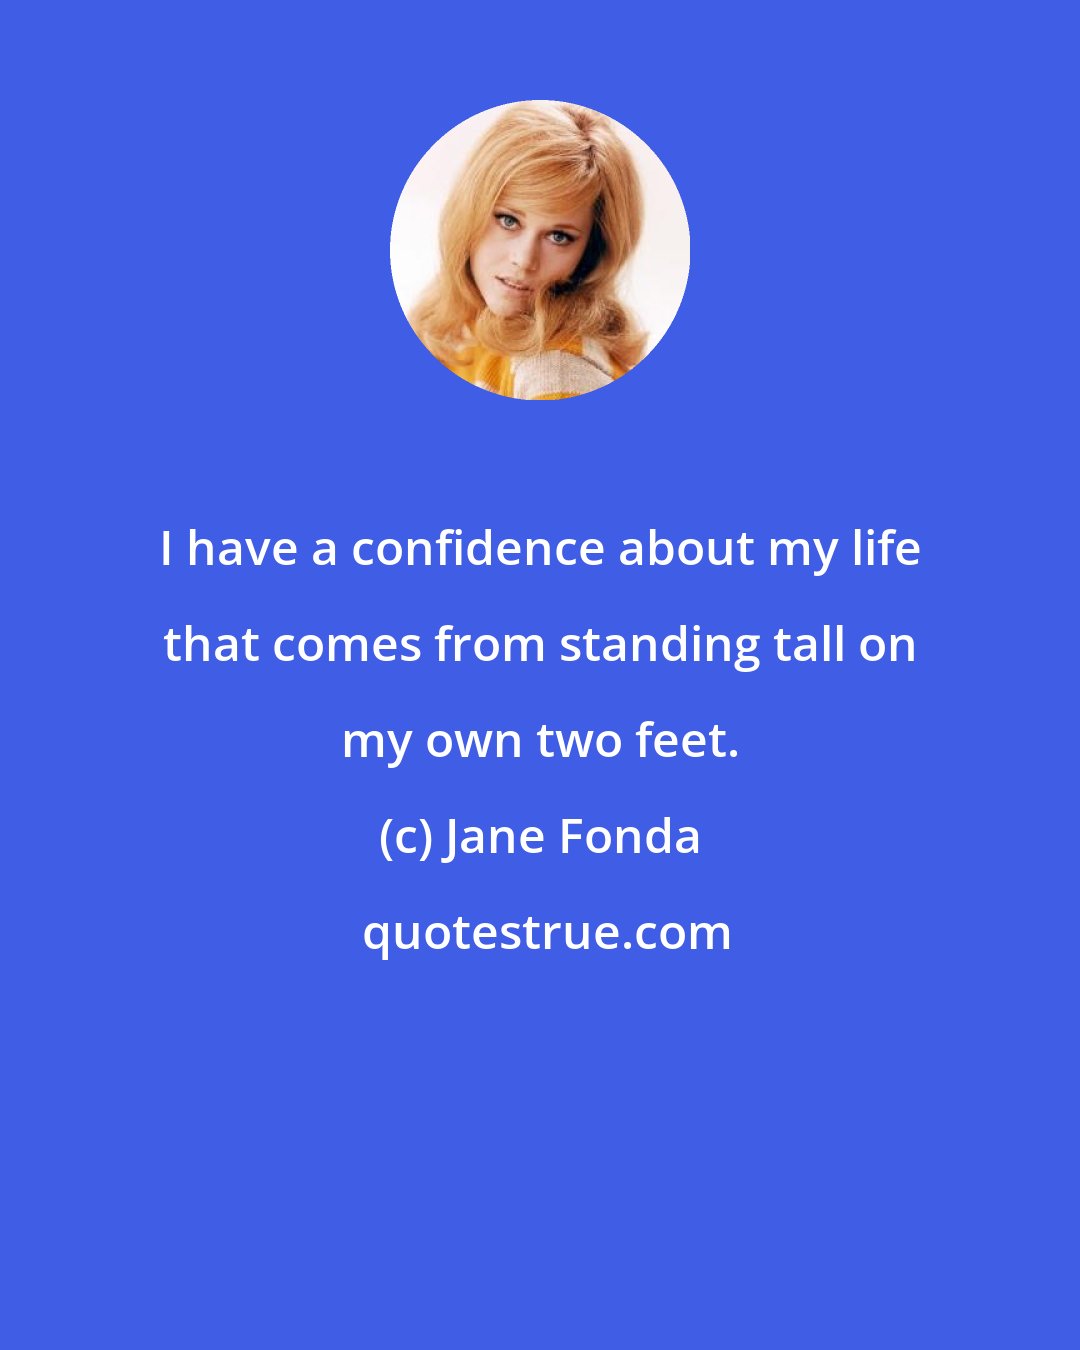 Jane Fonda: I have a confidence about my life that comes from standing tall on my own two feet.